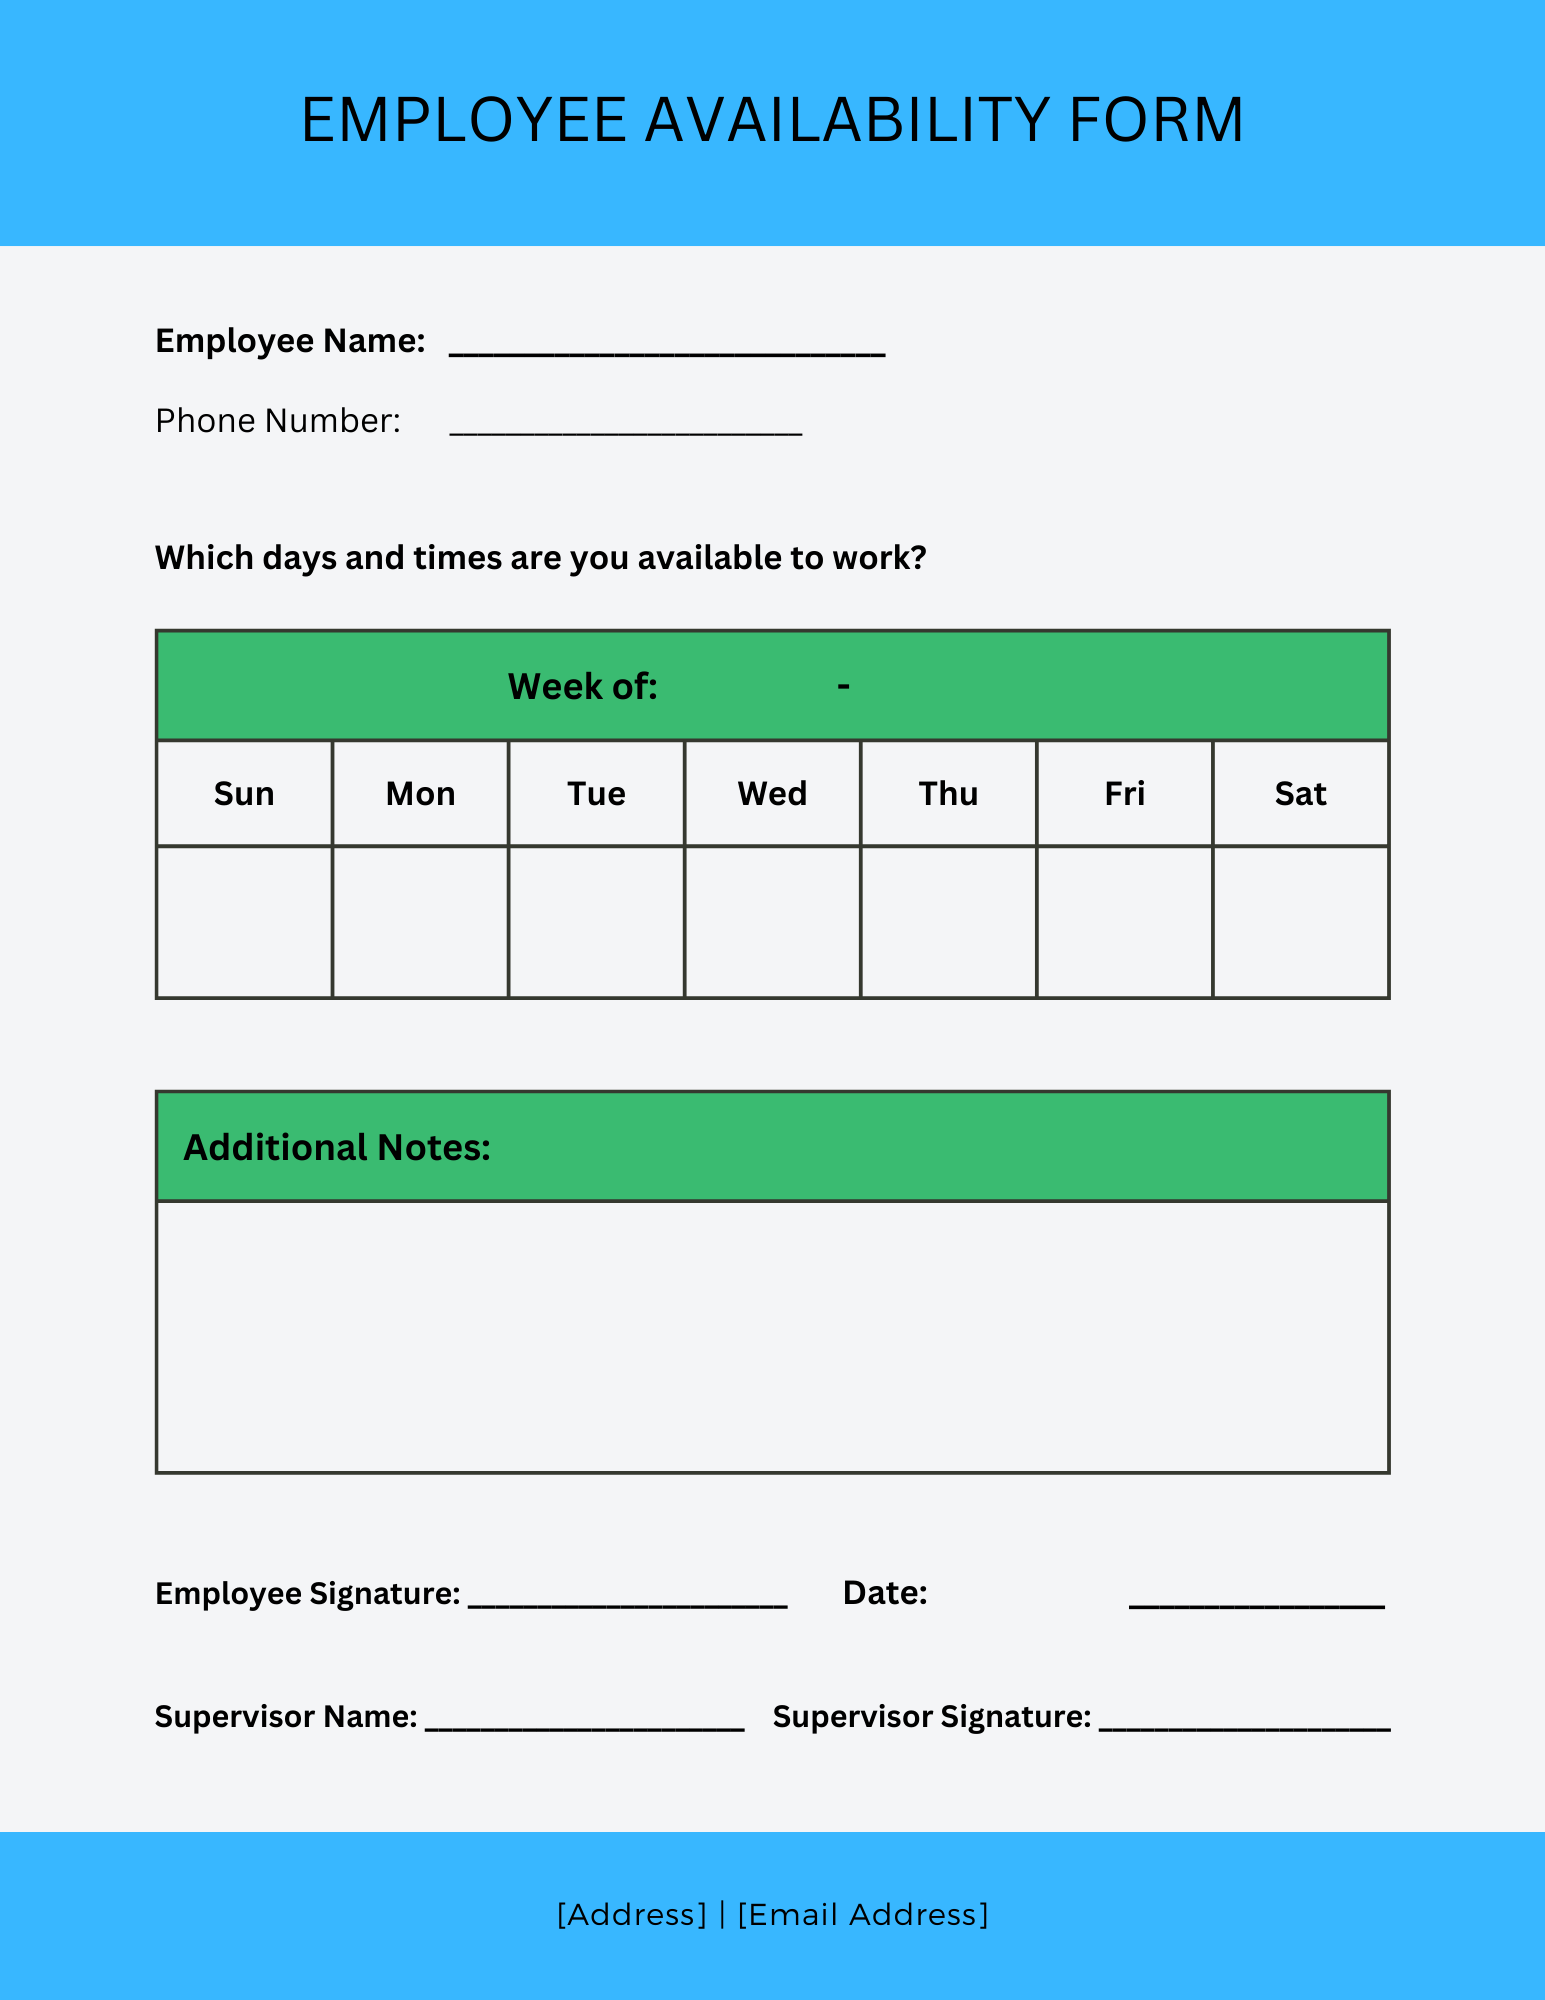 Employee Availability Form Template Buildremote